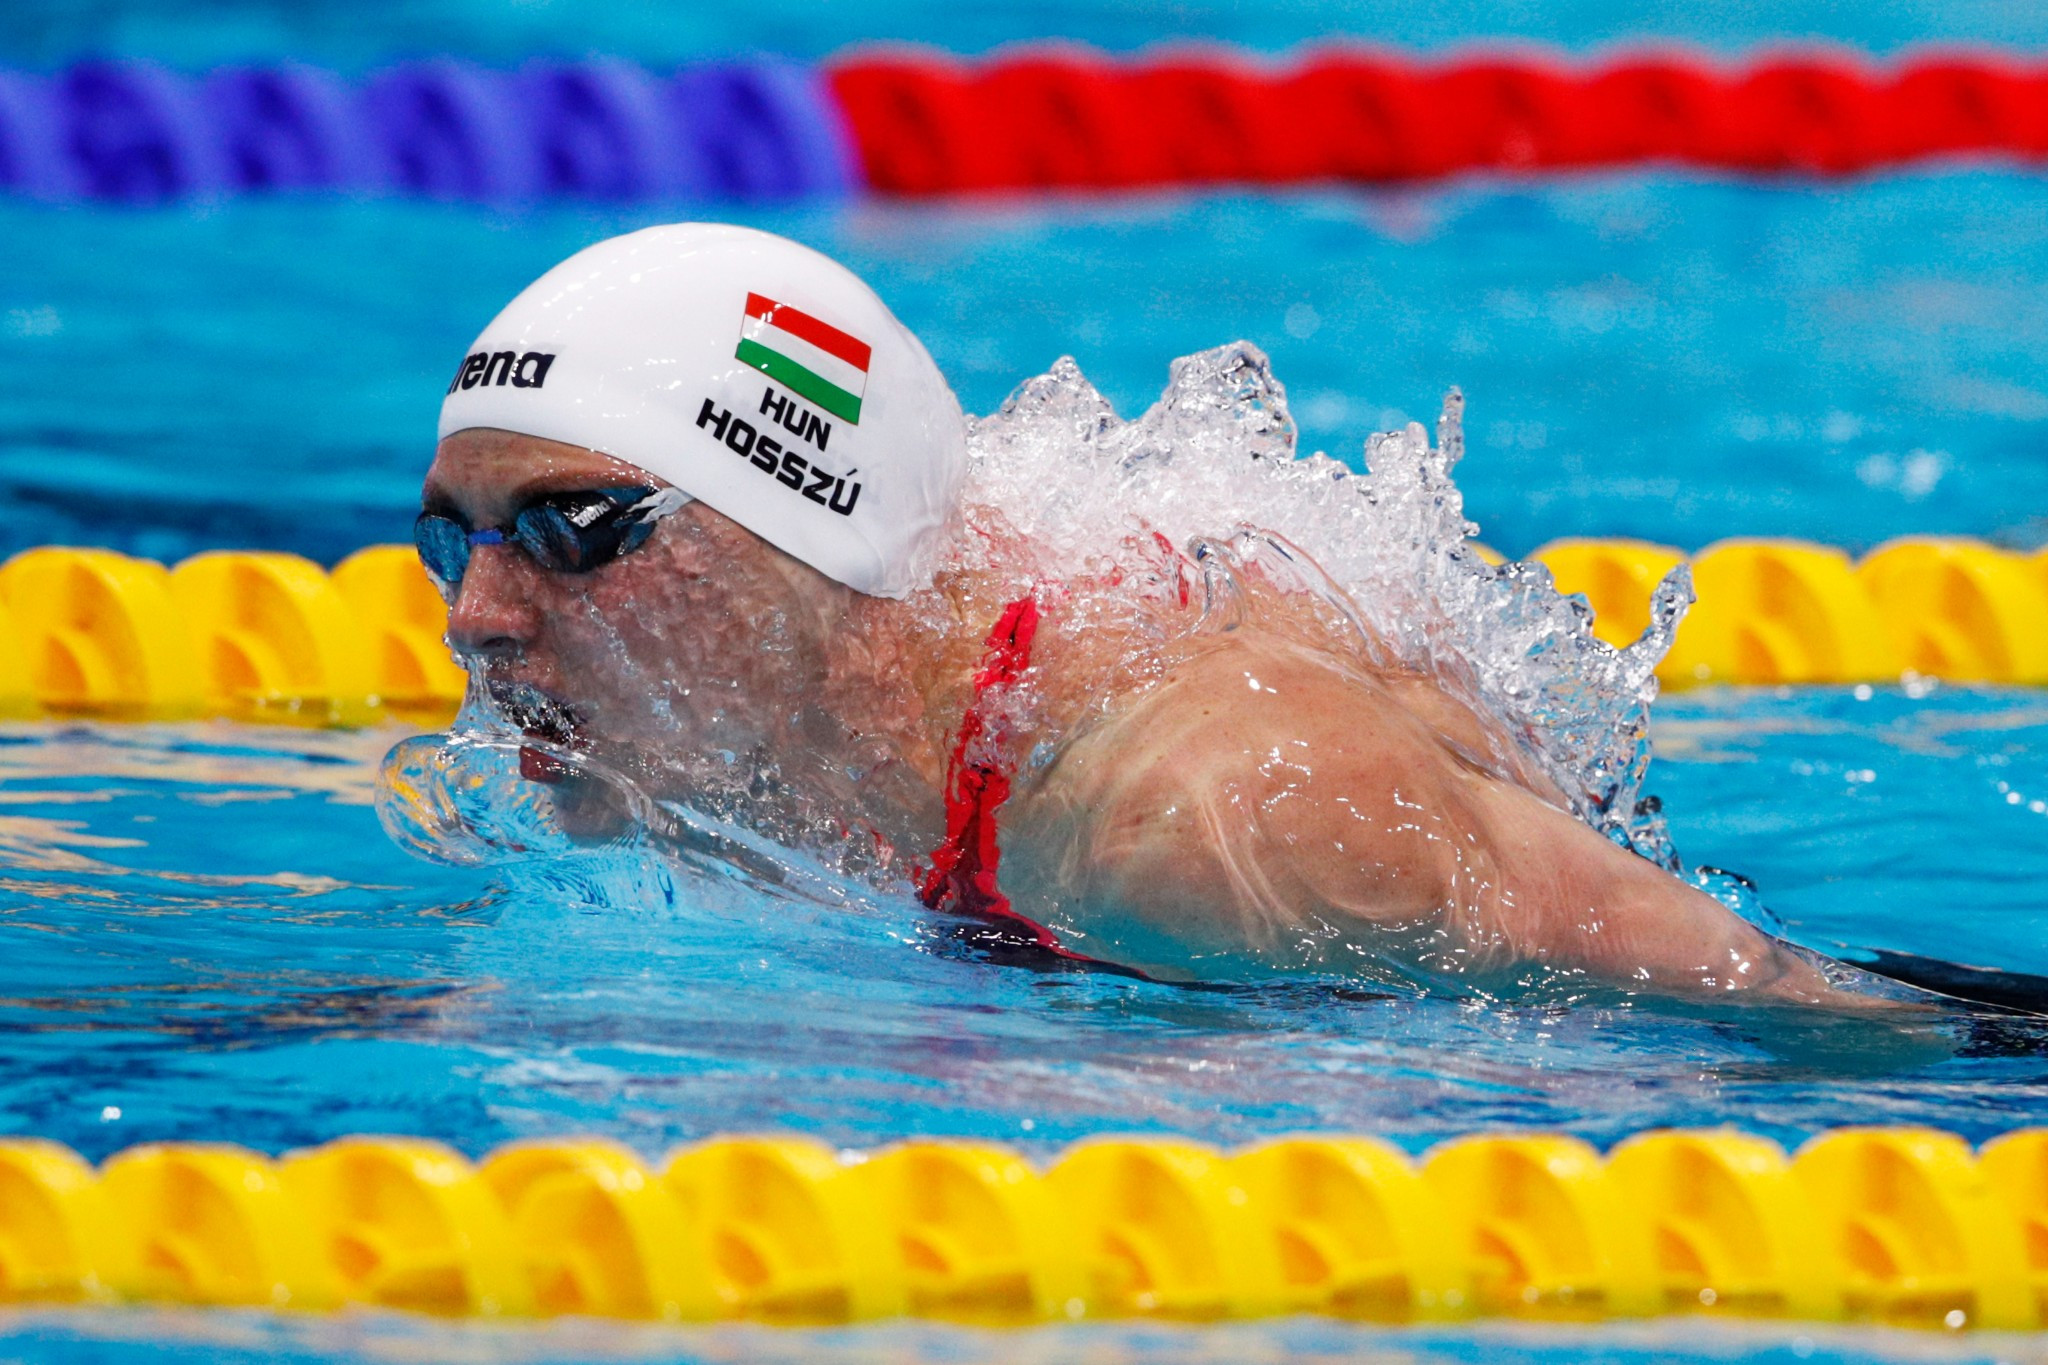 Katinka Hosszu won backstroke and medley titles in Moscow ©Getty Images